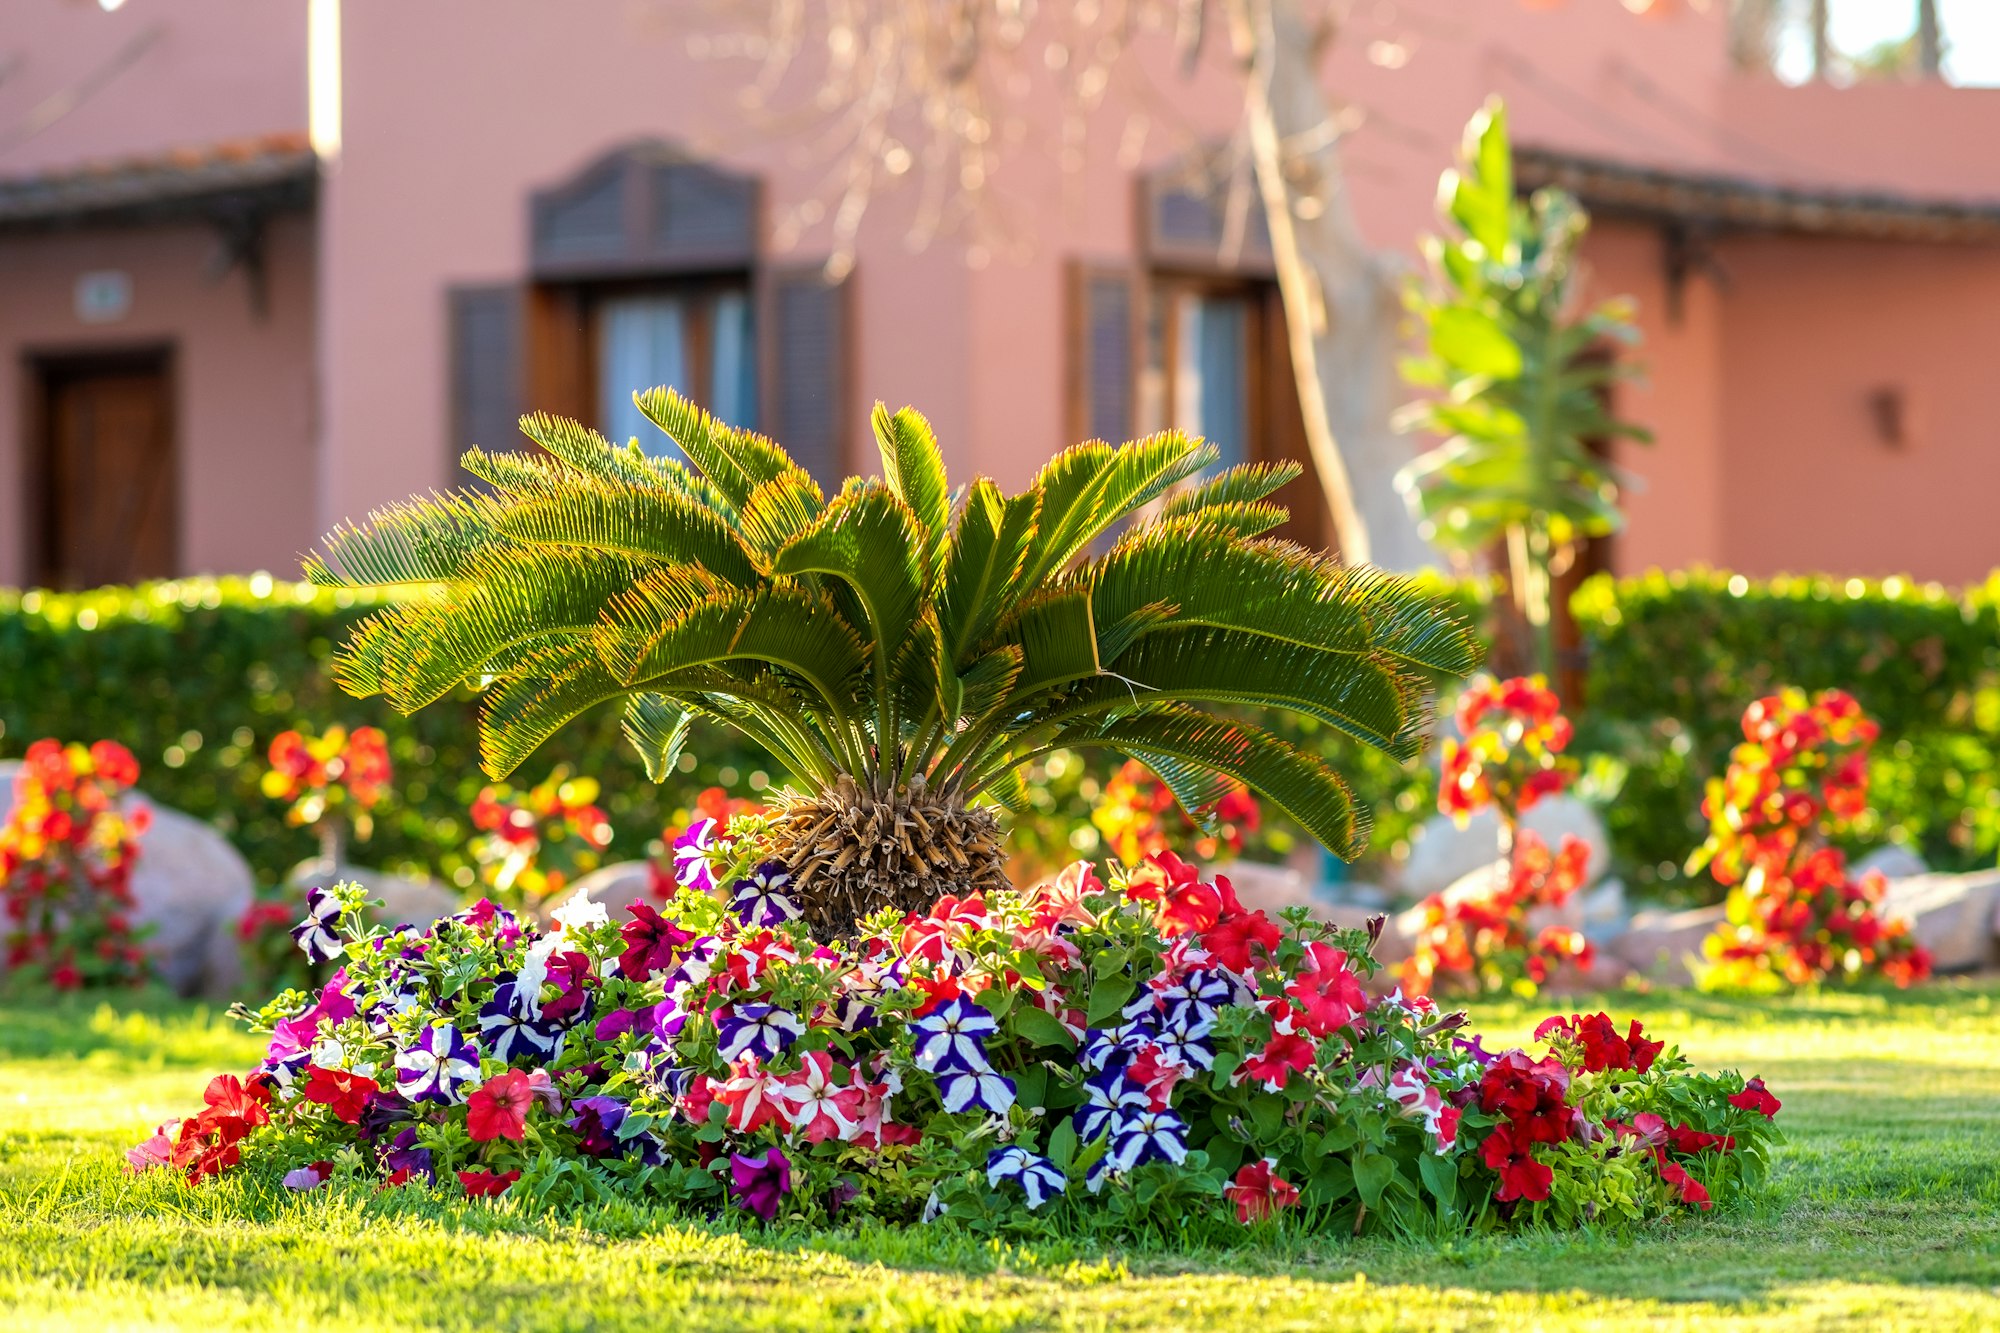 Small green palm tree surrounded with bright blooming flowers growing on grass covered lawn in